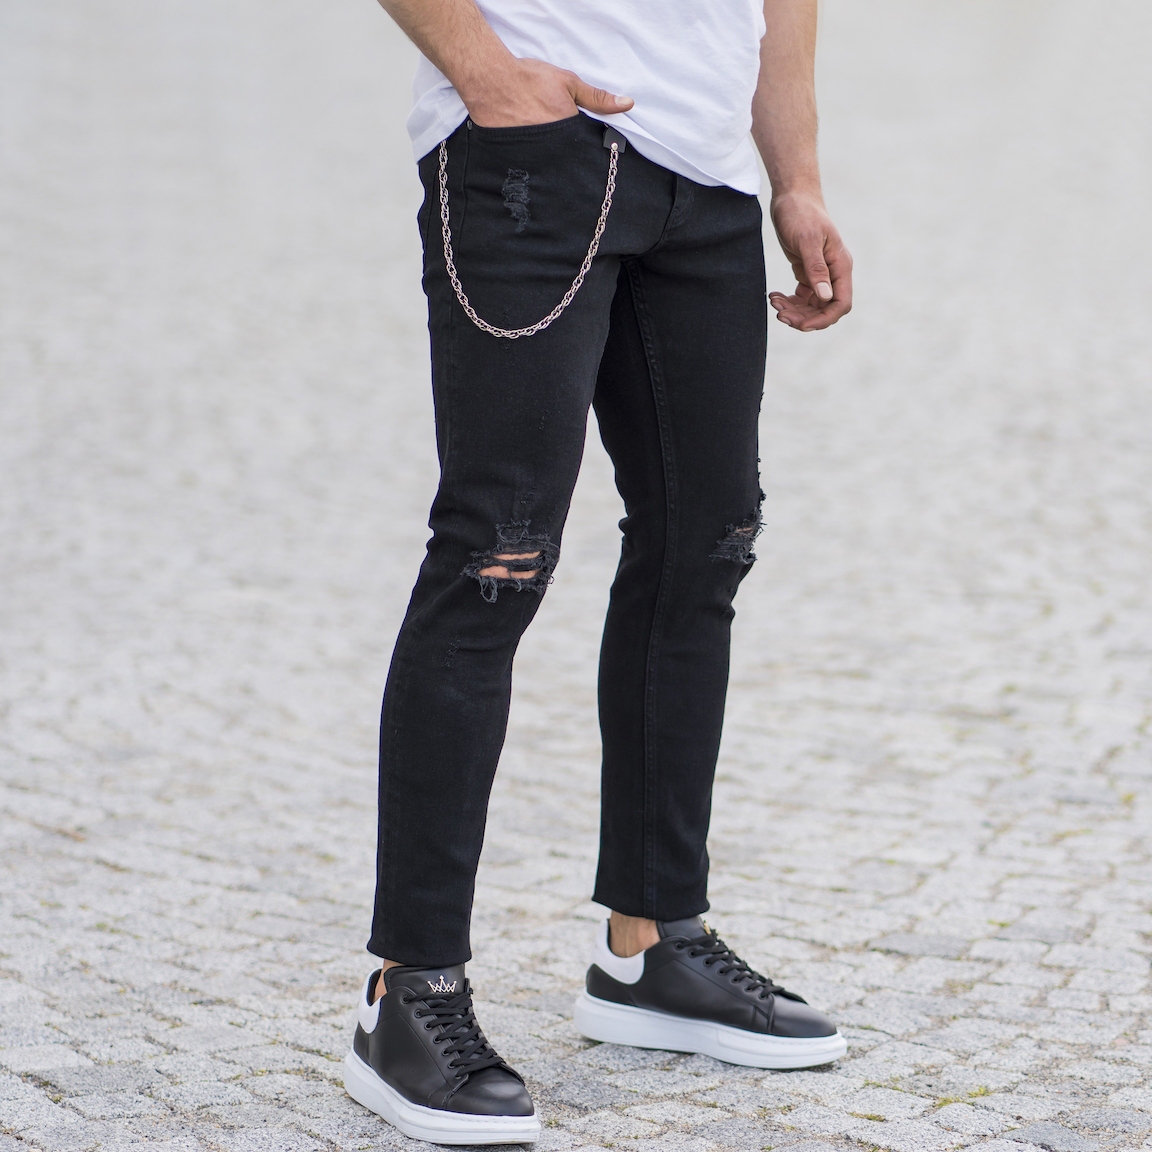 Men's Regged Jeans With Chain In Black